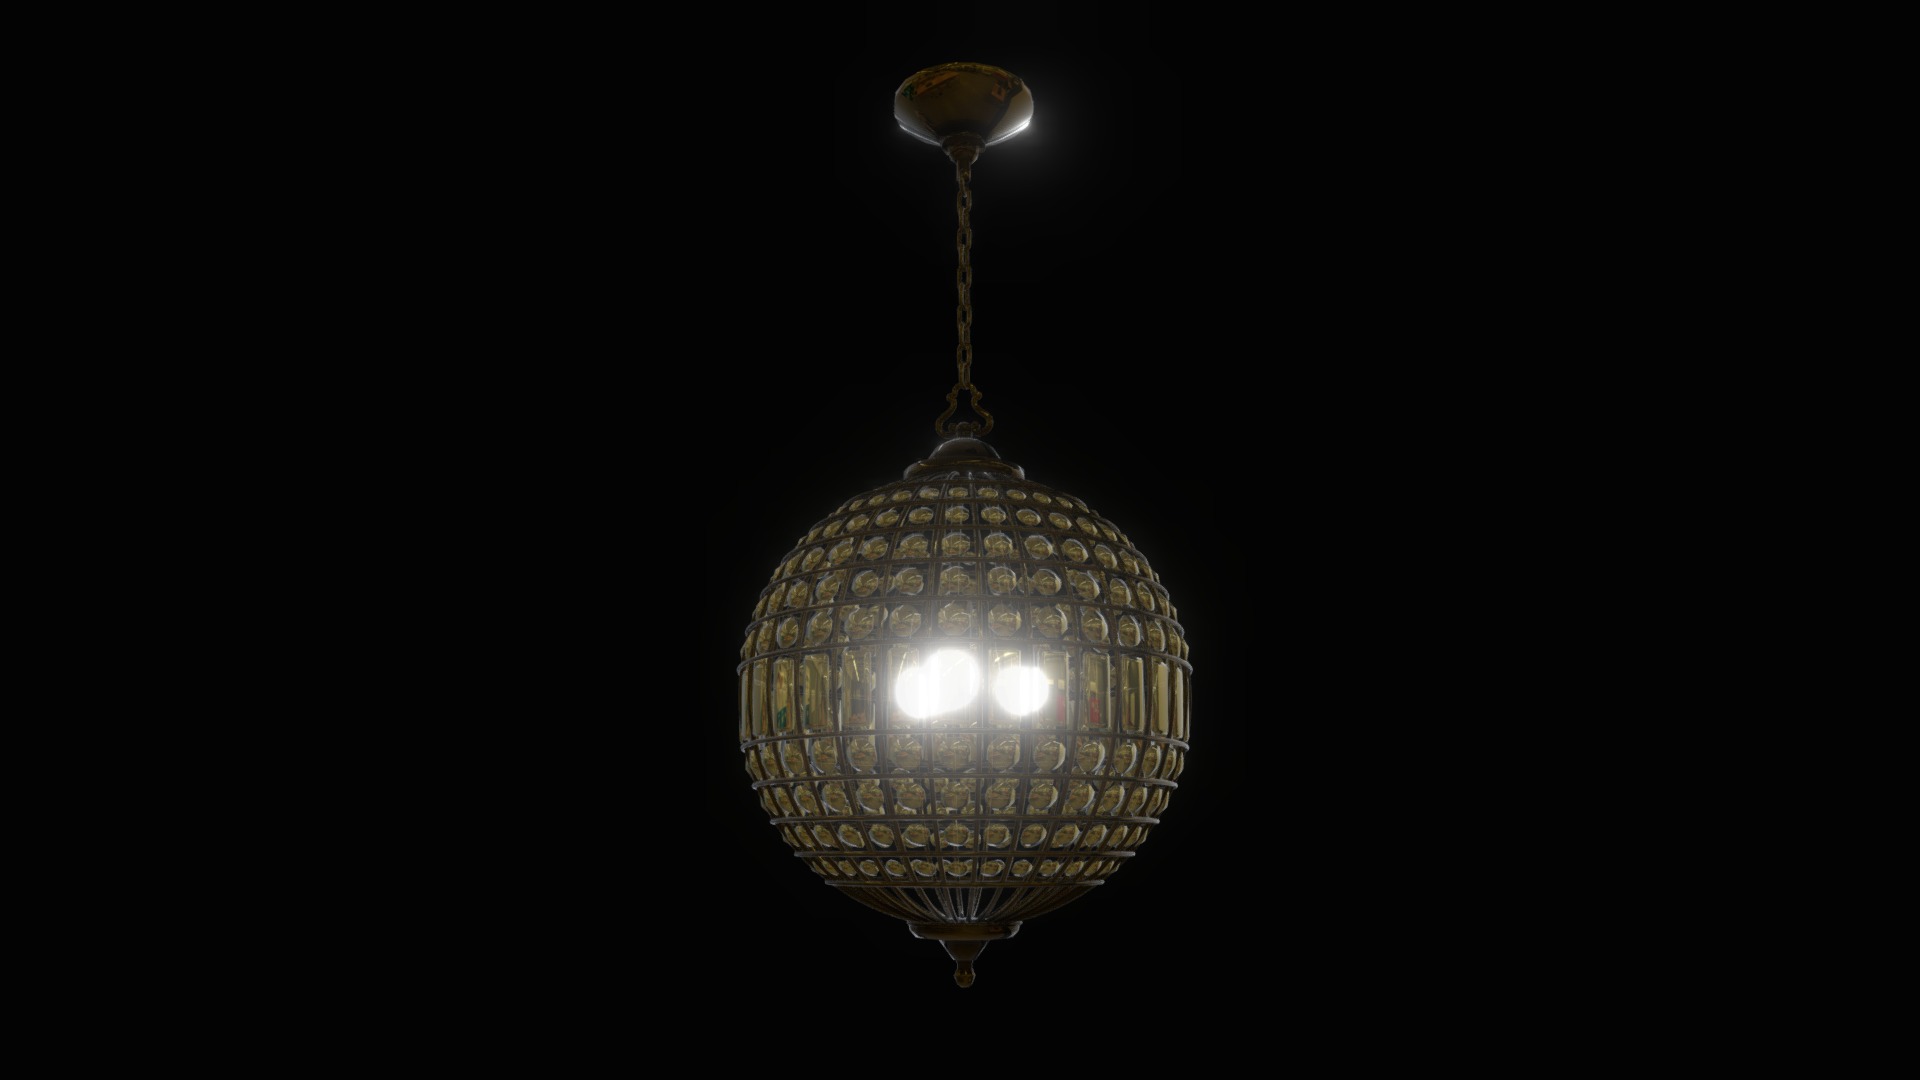 3D model HGPOGS-CL52 - This is a 3D model of the HGPOGS-CL52. The 3D model is about a light fixture with a light on top.